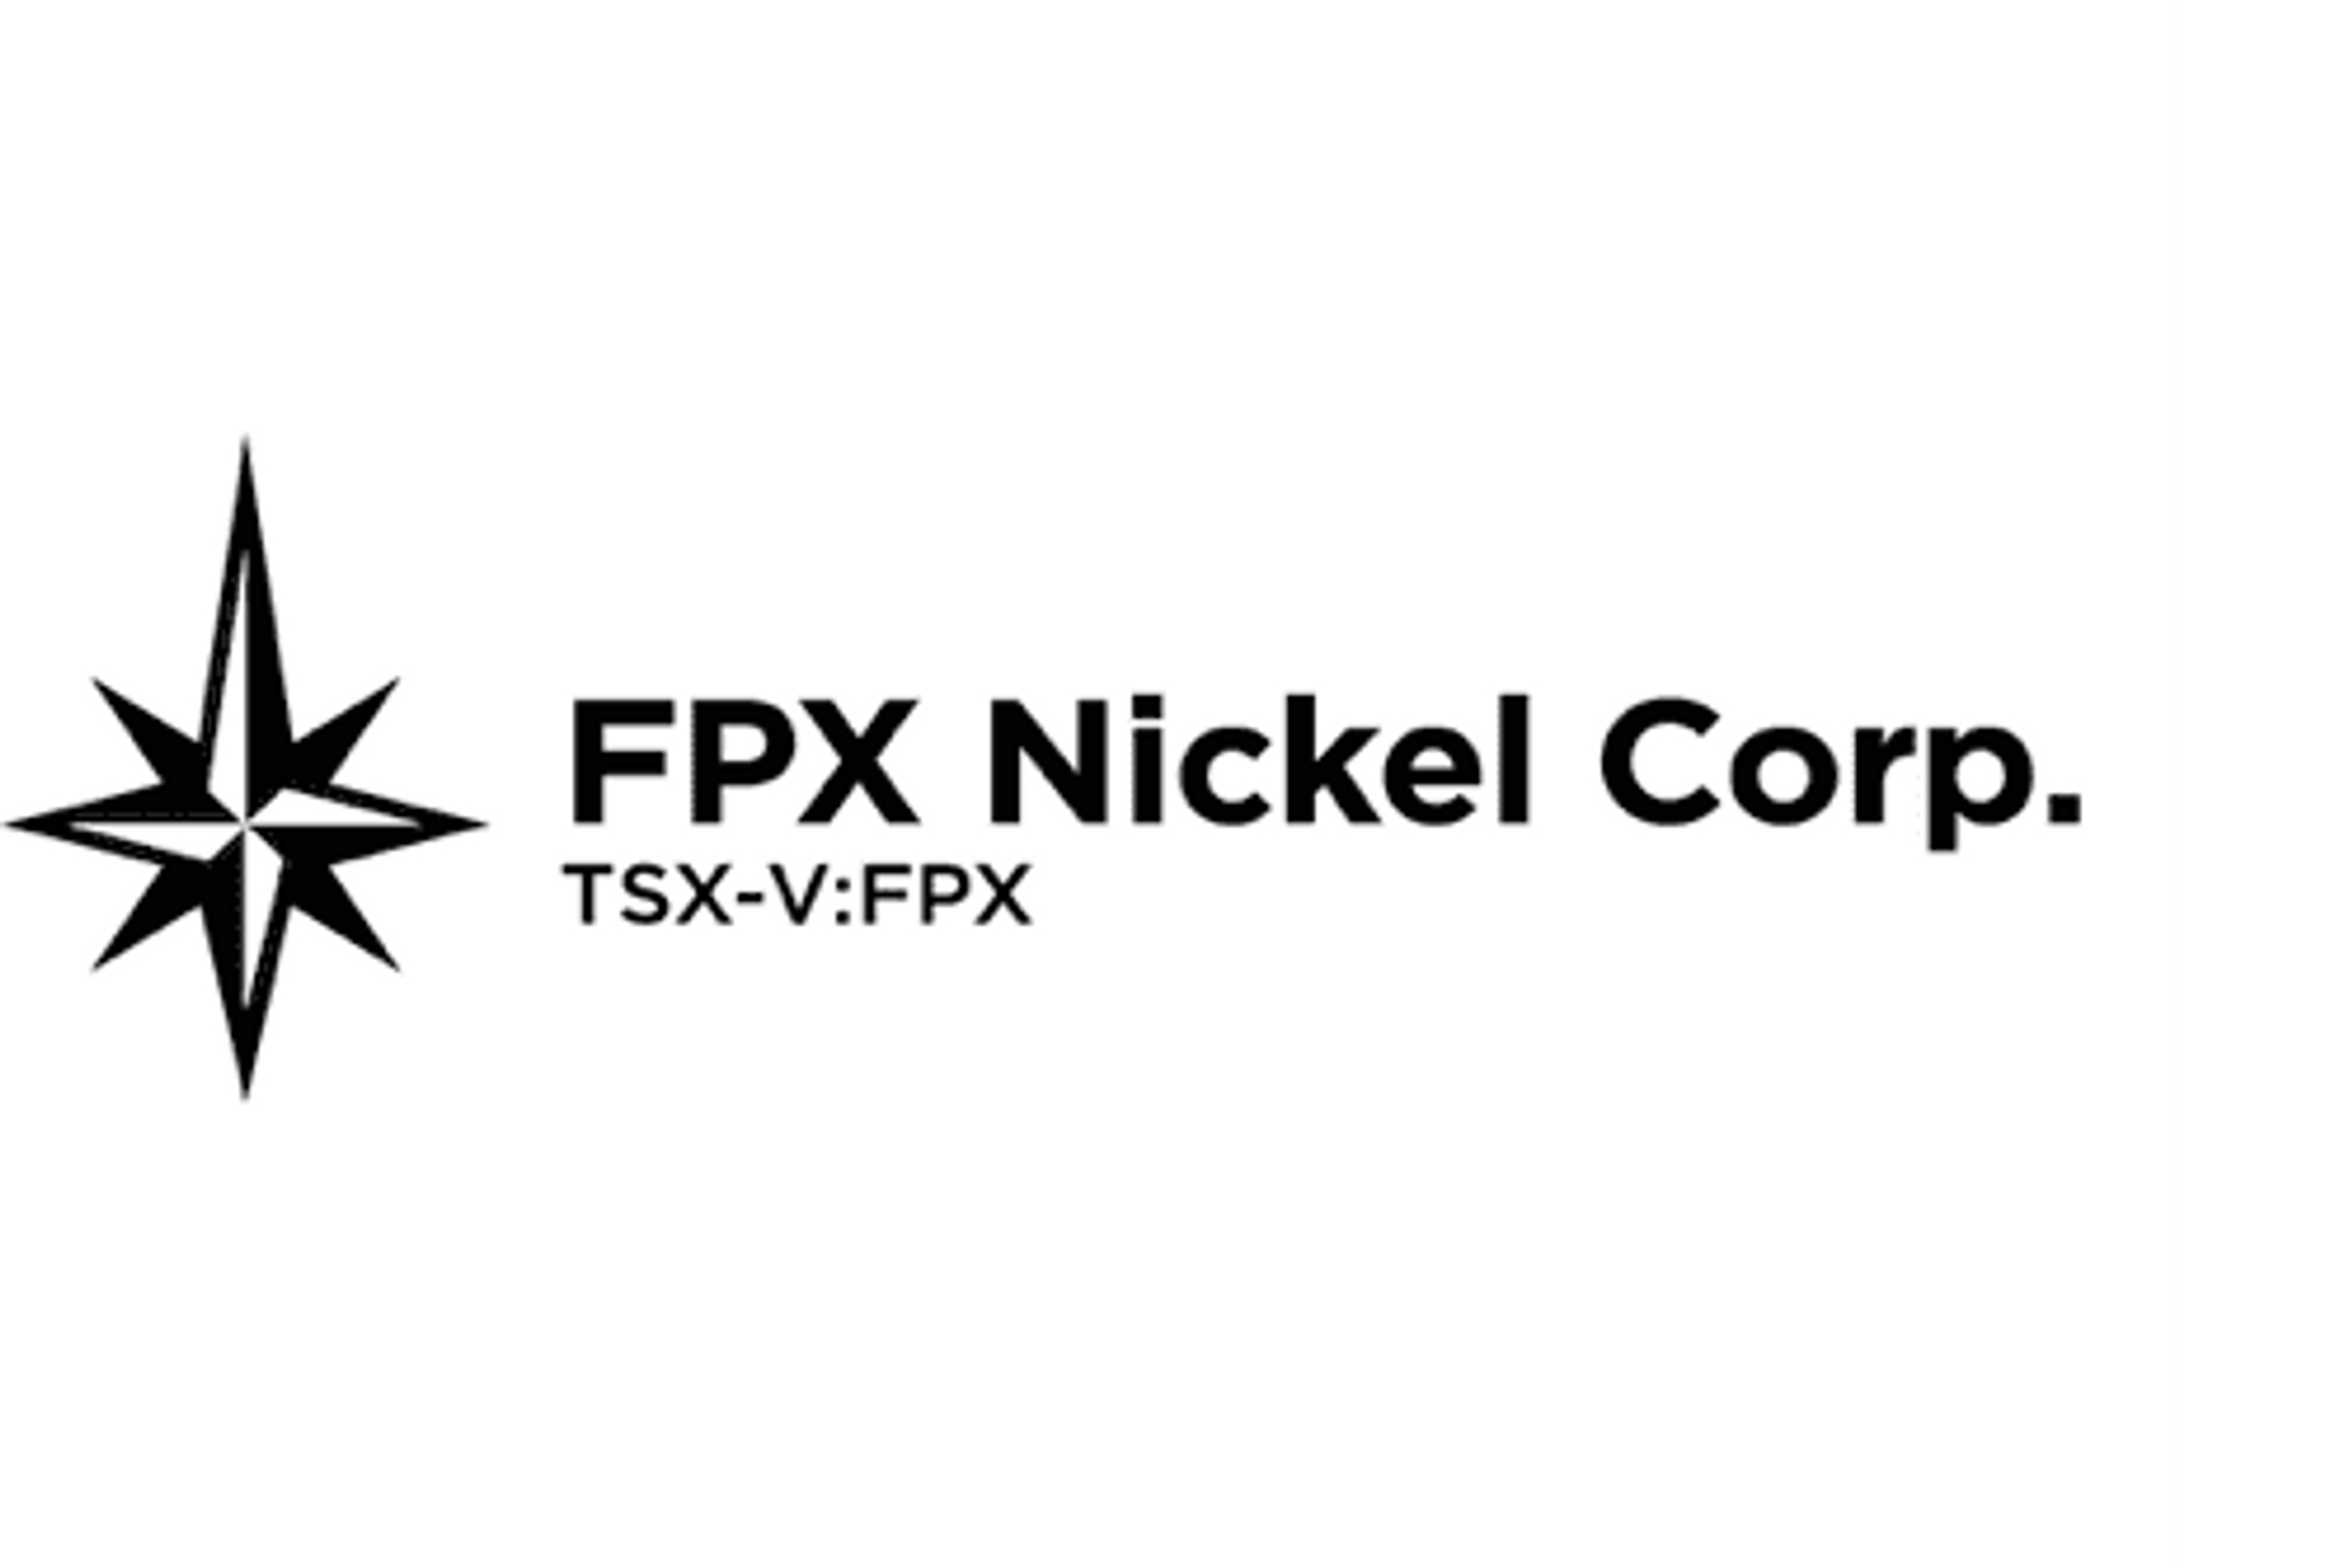 FPX Nickel to Present at TD Securities Global Mining Conference